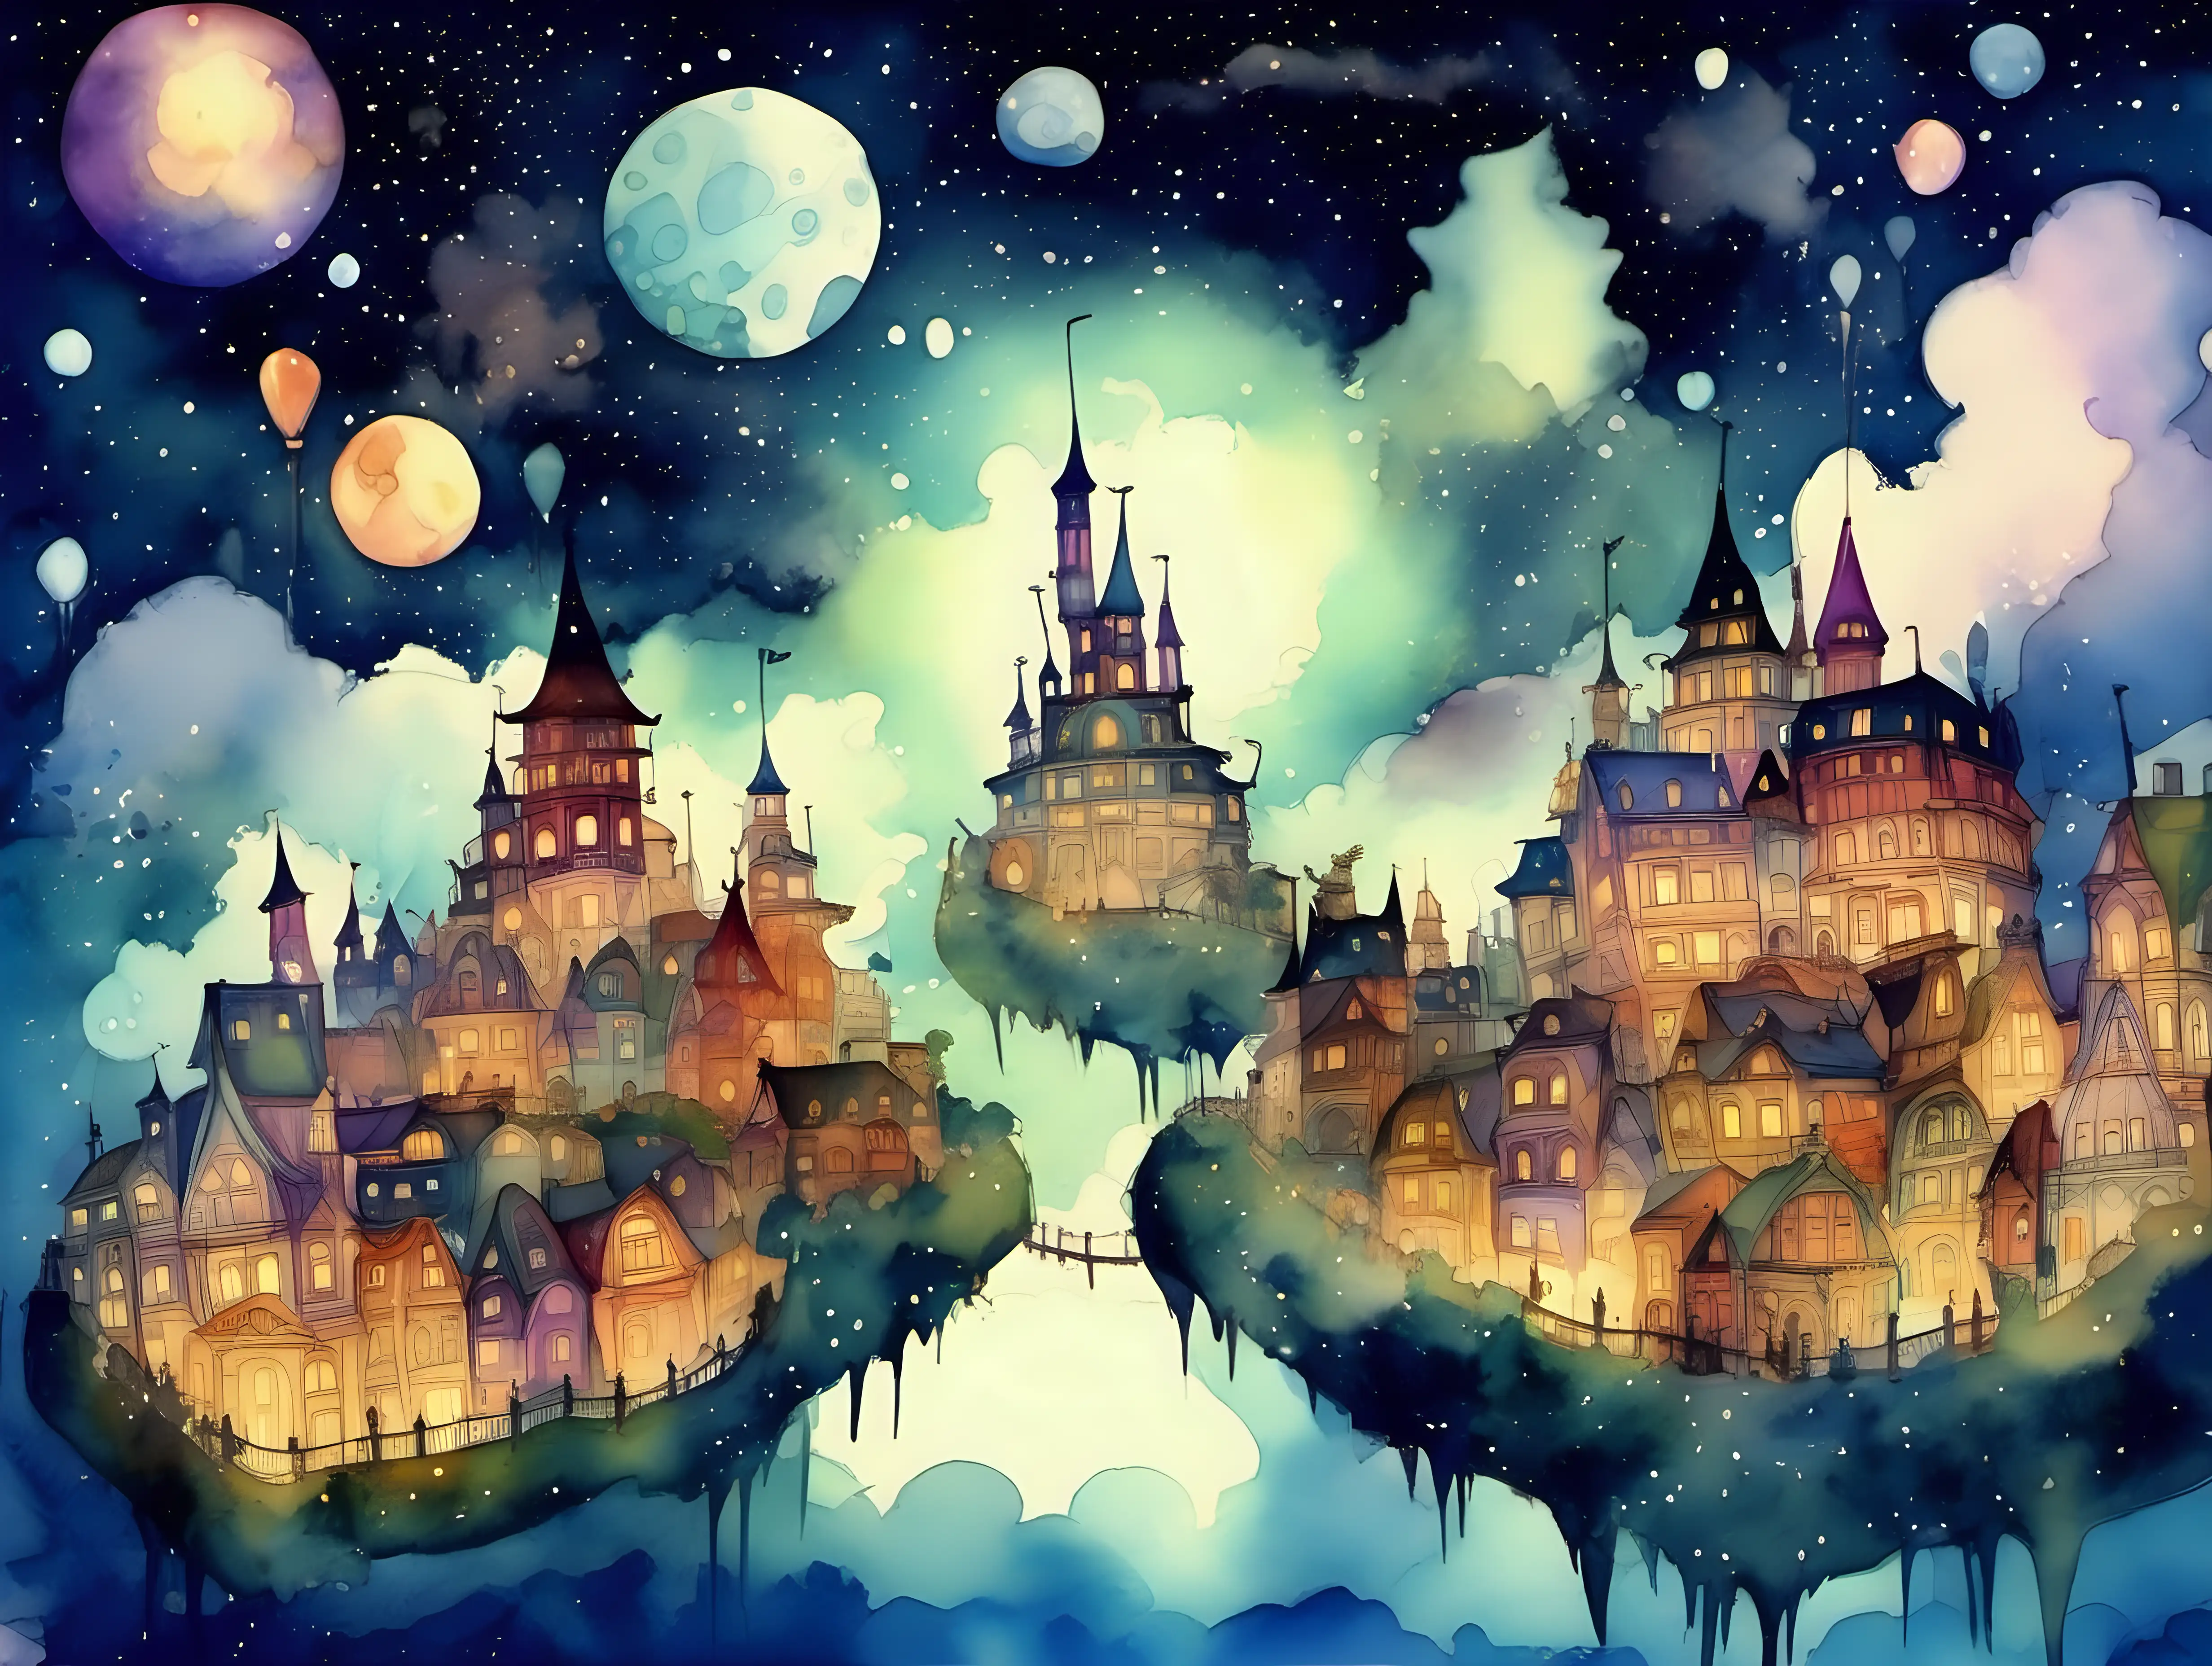 Whimsical Nighttime Dreamland Floating Islands Starry Skies and Enchanting Cloud Castles